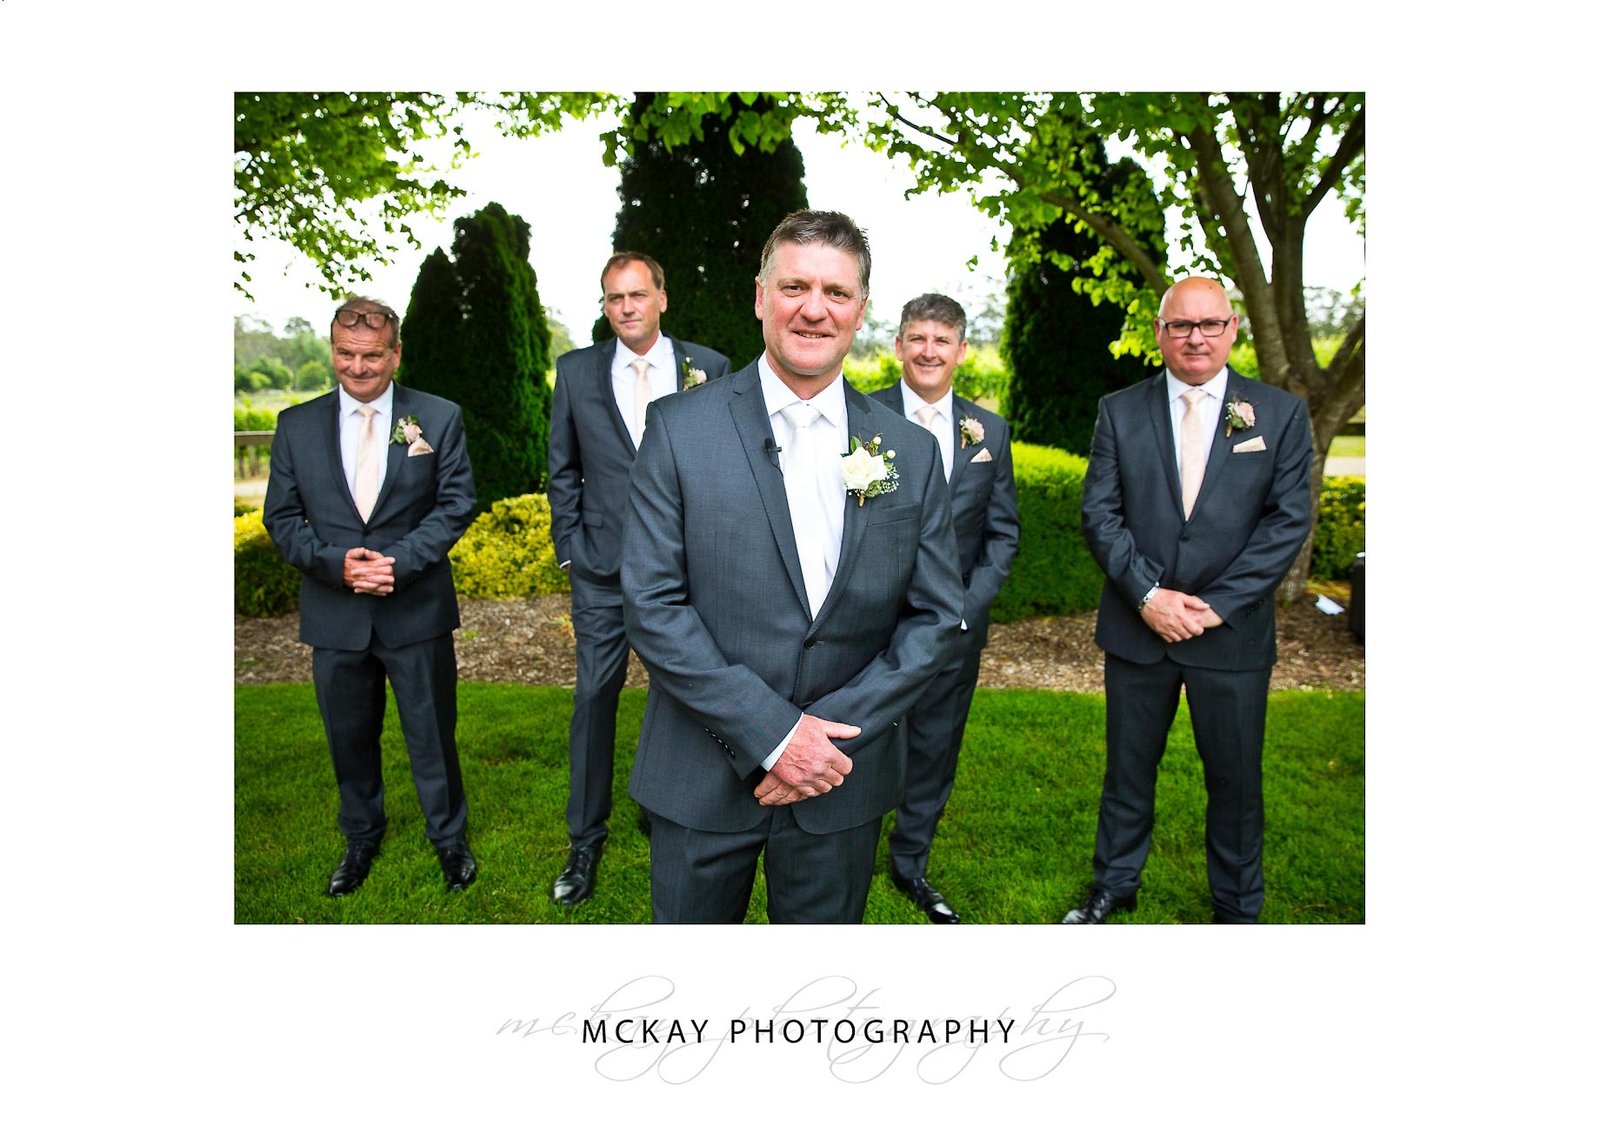 Pete and the groomsmen